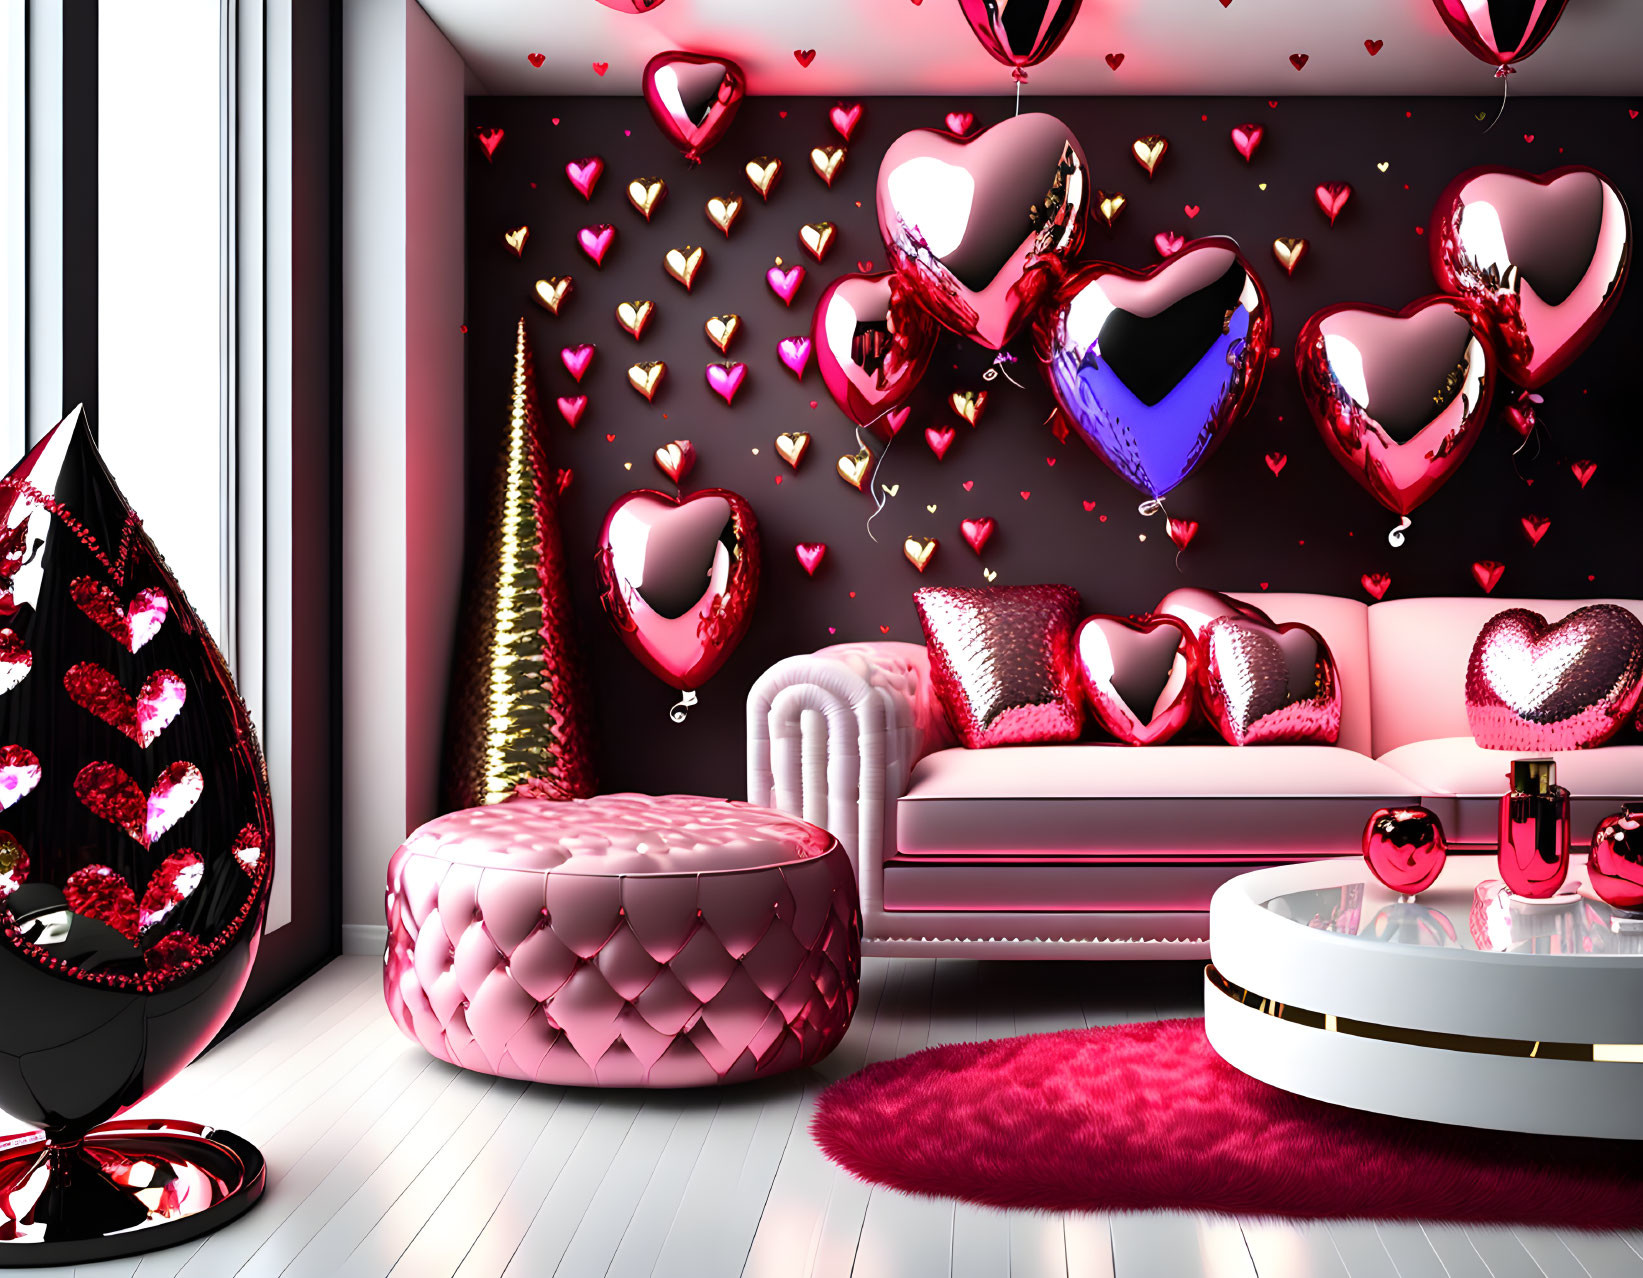 Colorful Heart-Themed Room with Balloons, Cushions, and Artwork